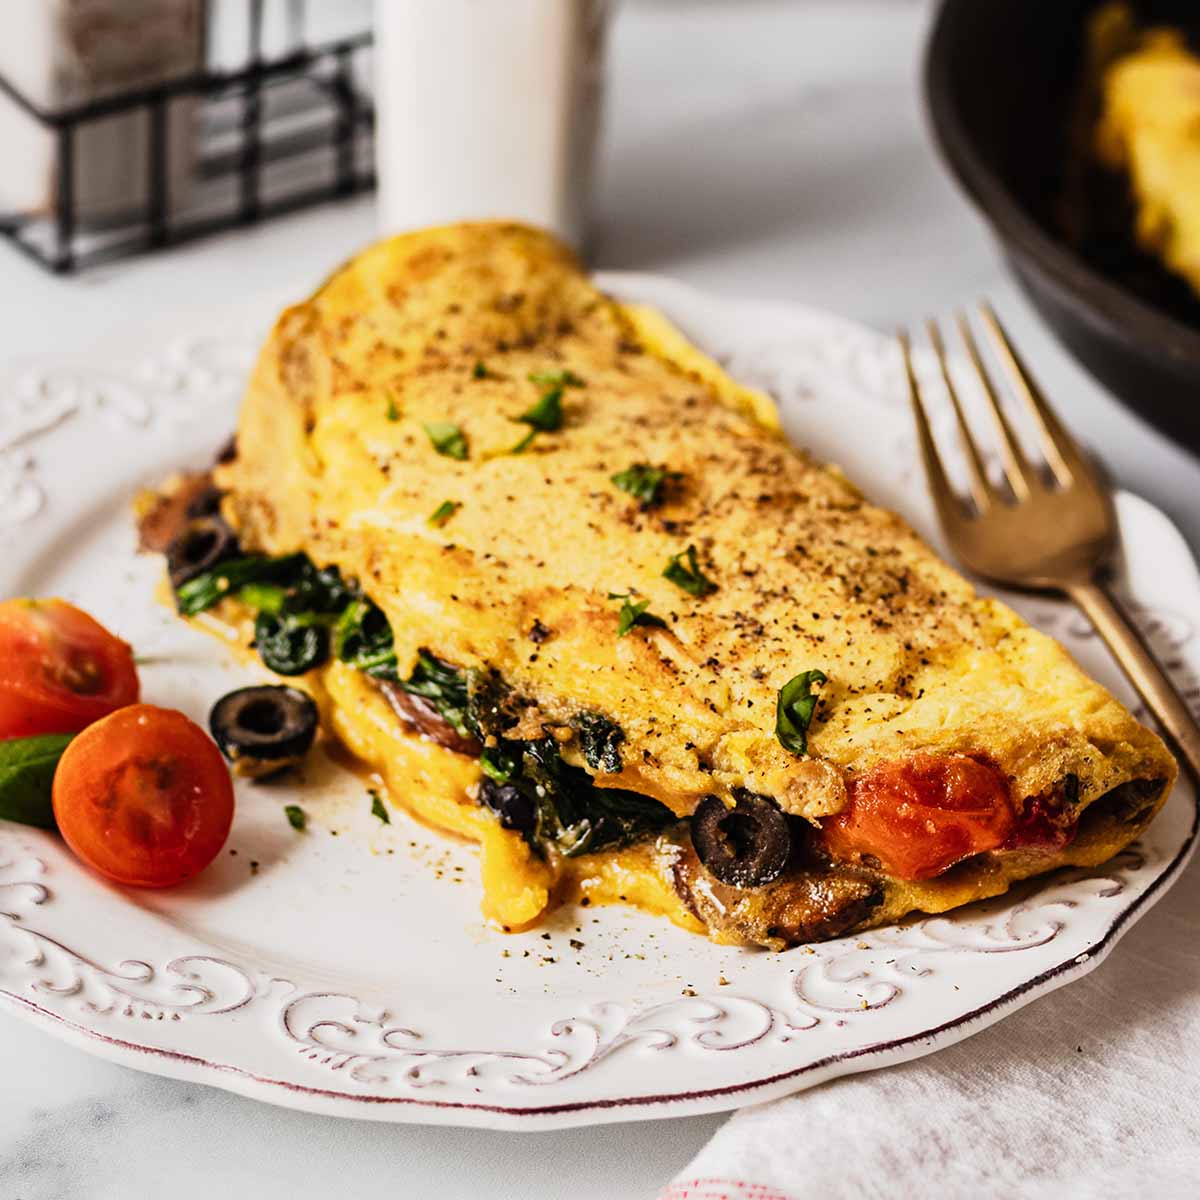 Omelette Recipe : Dinner Omelet Is An Easy And Quick Recipe _ Mar 25 ...